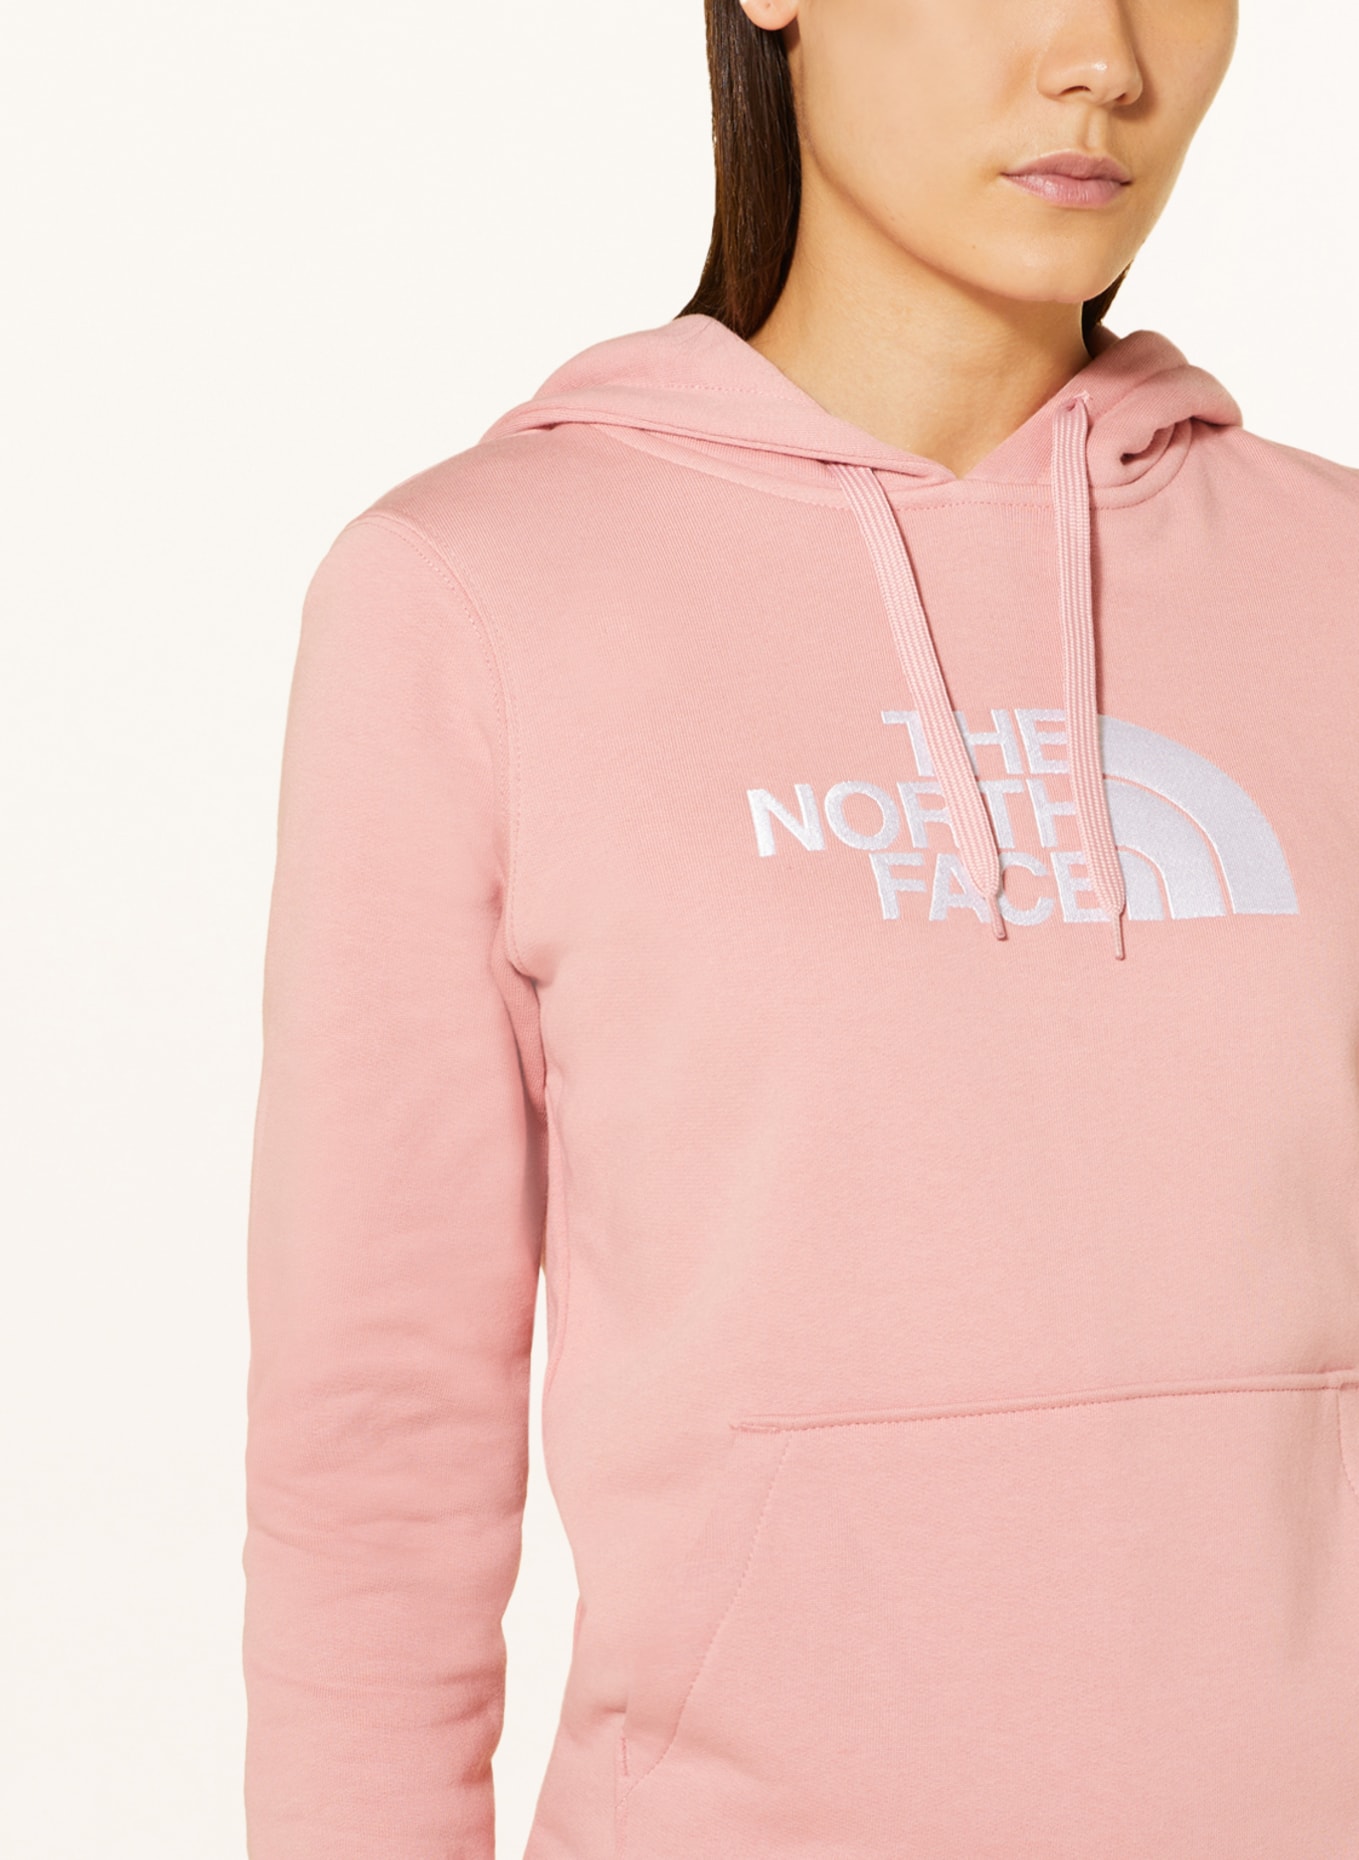 THE NORTH FACE Hoodie DREW, Farbe: ROSÉ/ WEISS (Bild 5)